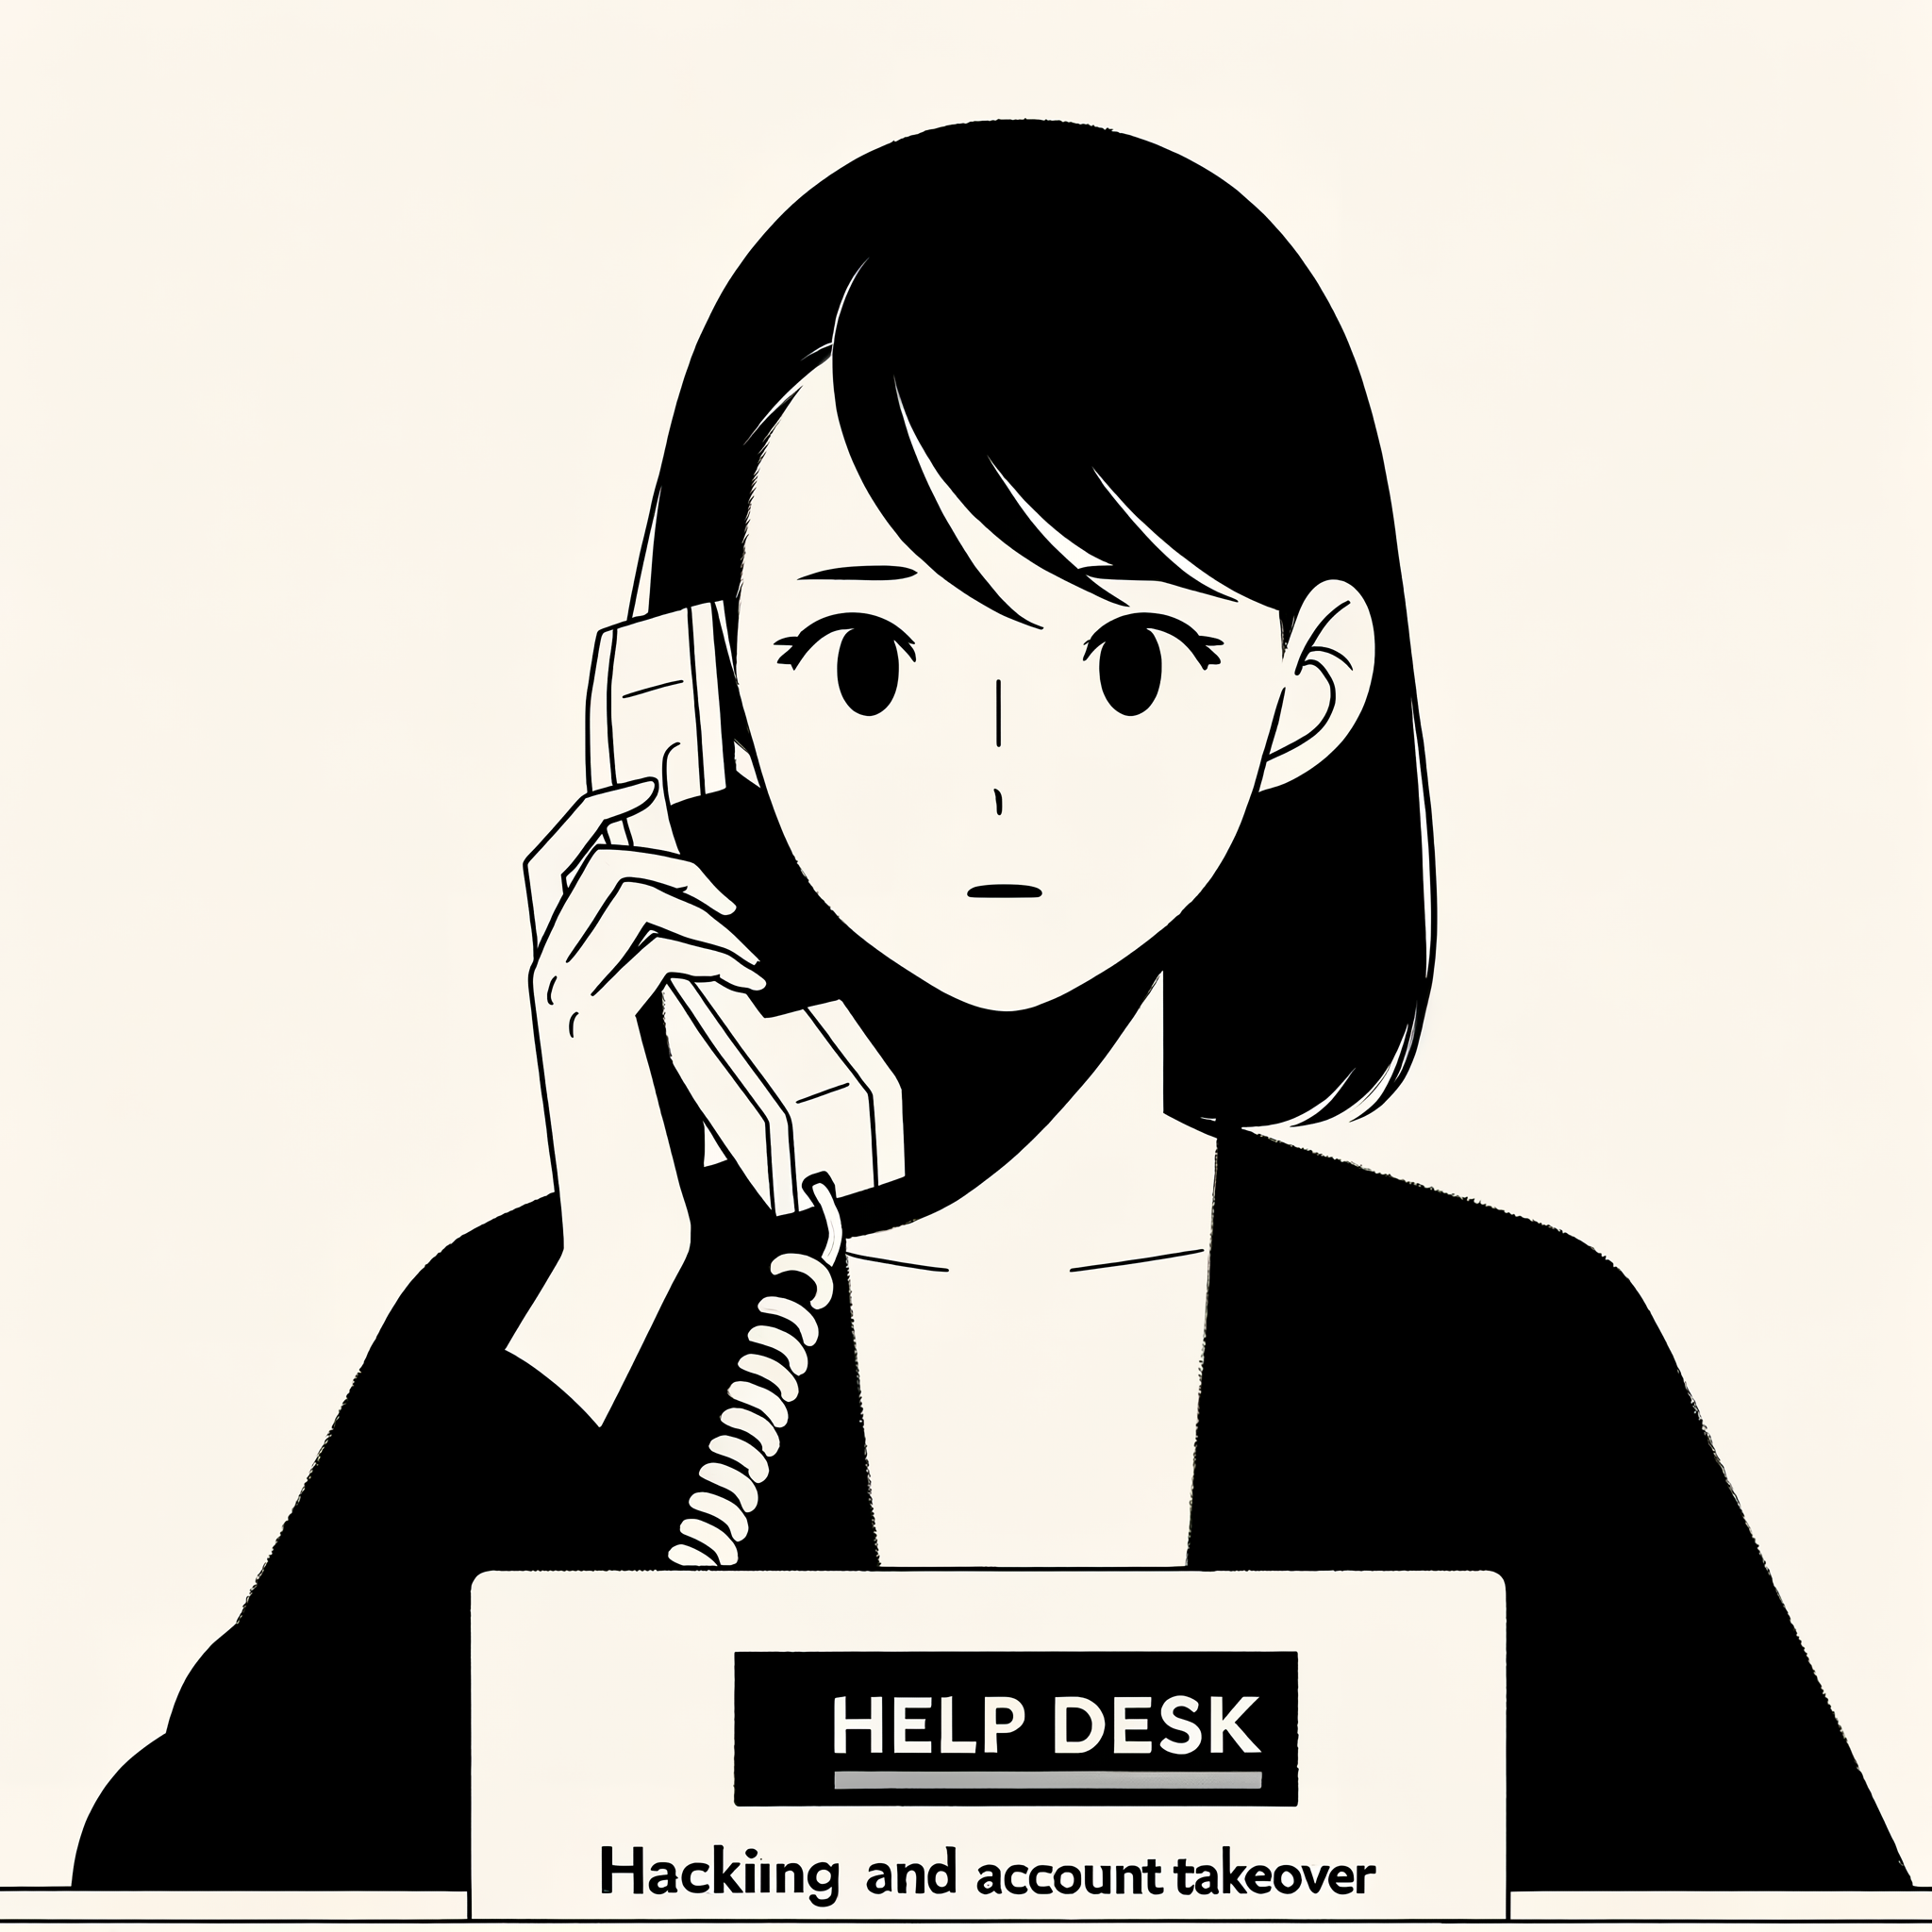 A very simple illustration of a Japanese woman with black hair, consulting a help desk about hacking and account takeover issues. The woman is depicted in a straightforward, minimalistic style, conveying a sense of urgency and concern. She is on the phone, with a worried but calm expression. The background is plain and uncluttered, focusing the attention on the woman and her situation. The illustration should have a clean and straightforward aesthetic, emphasizing clarity and simplicity.